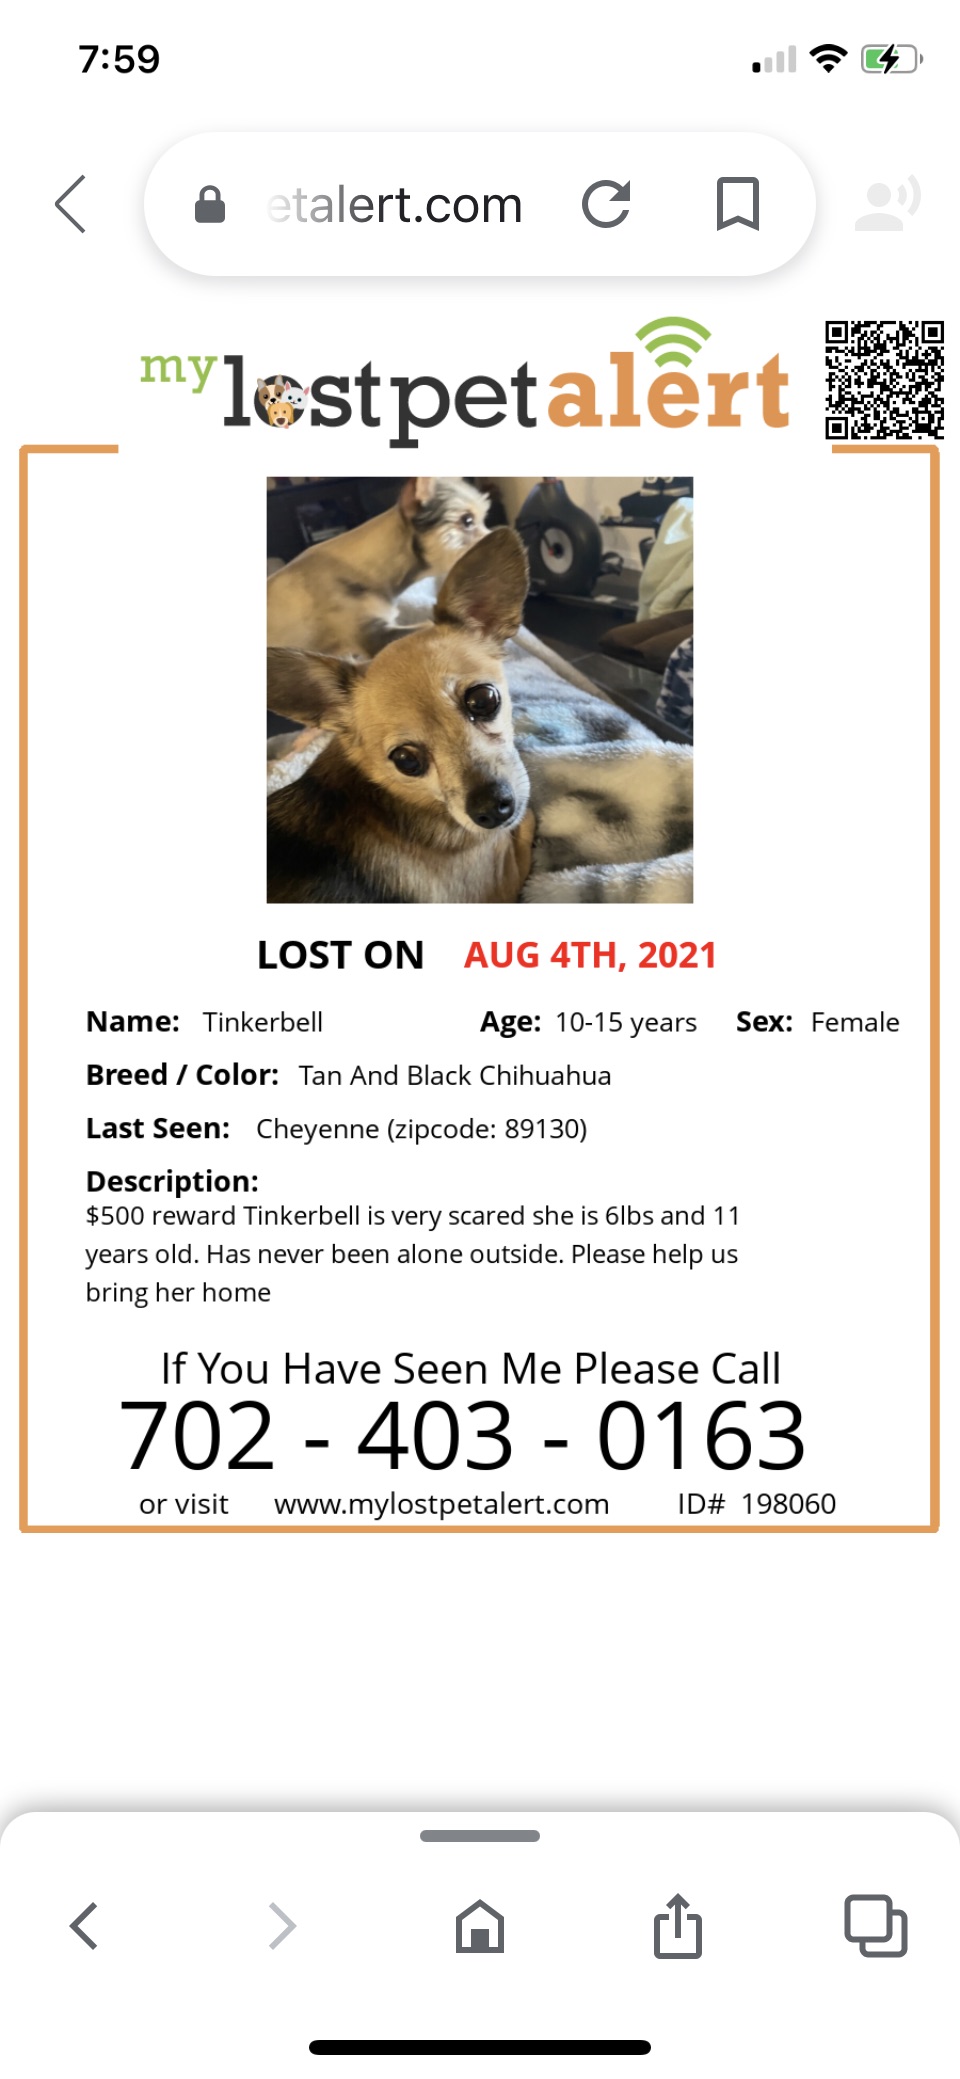 Image of TinkerBell, Lost Dog